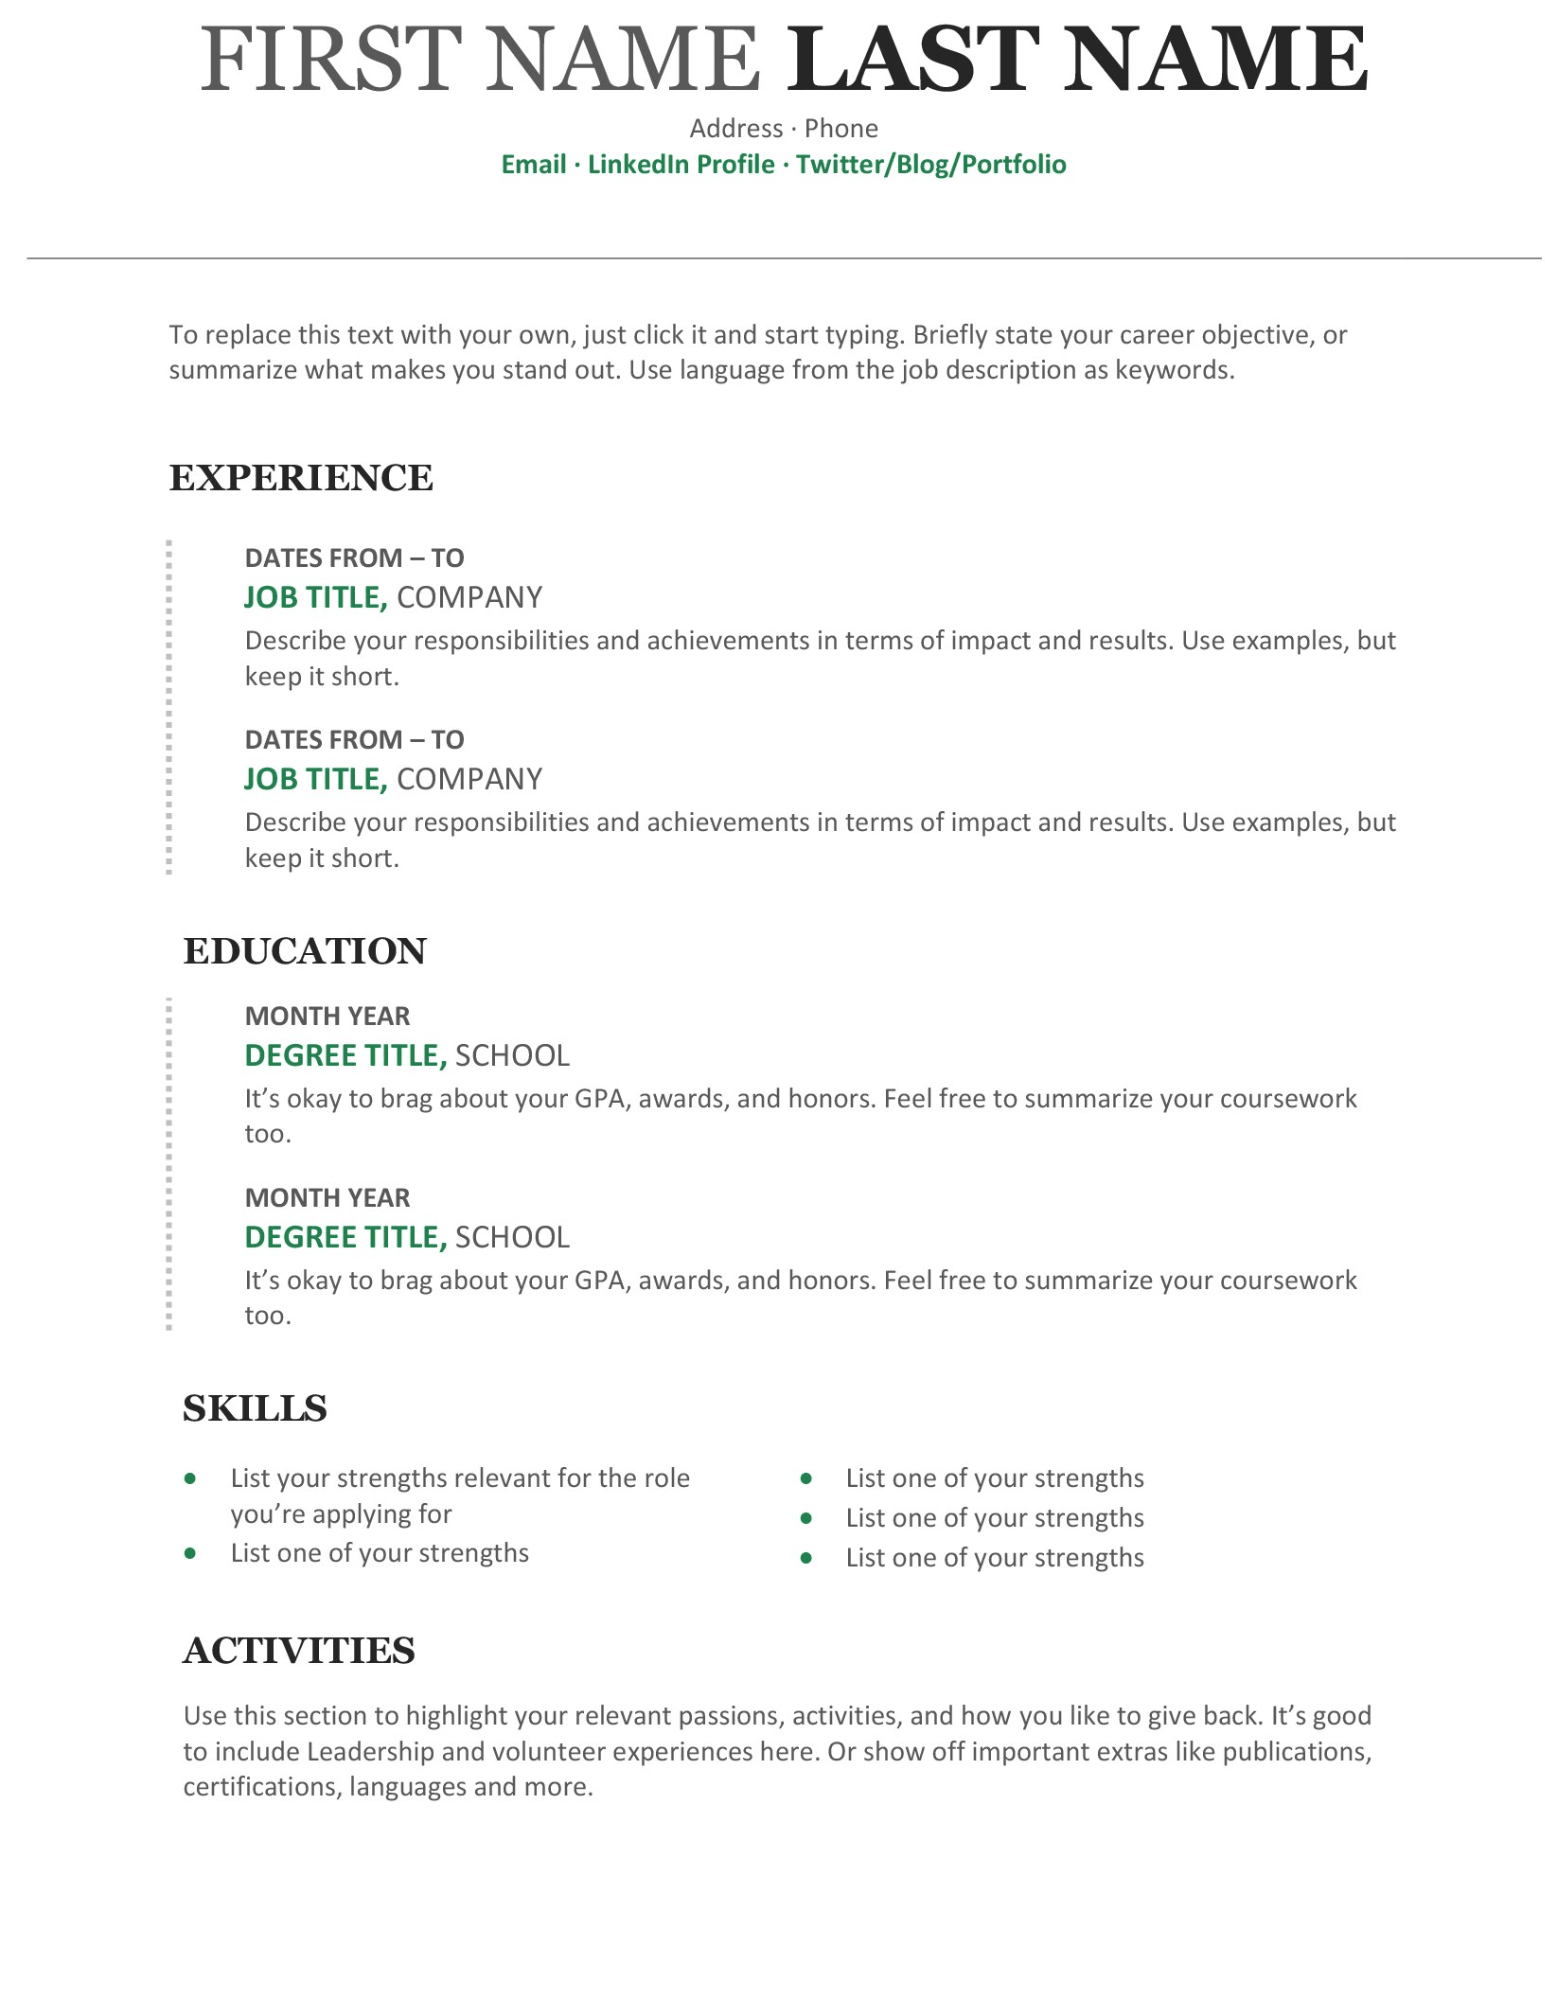 20+ Free And Premium Word Resume Templates [Download] With Regard To Microsoft Word Resumes Templates